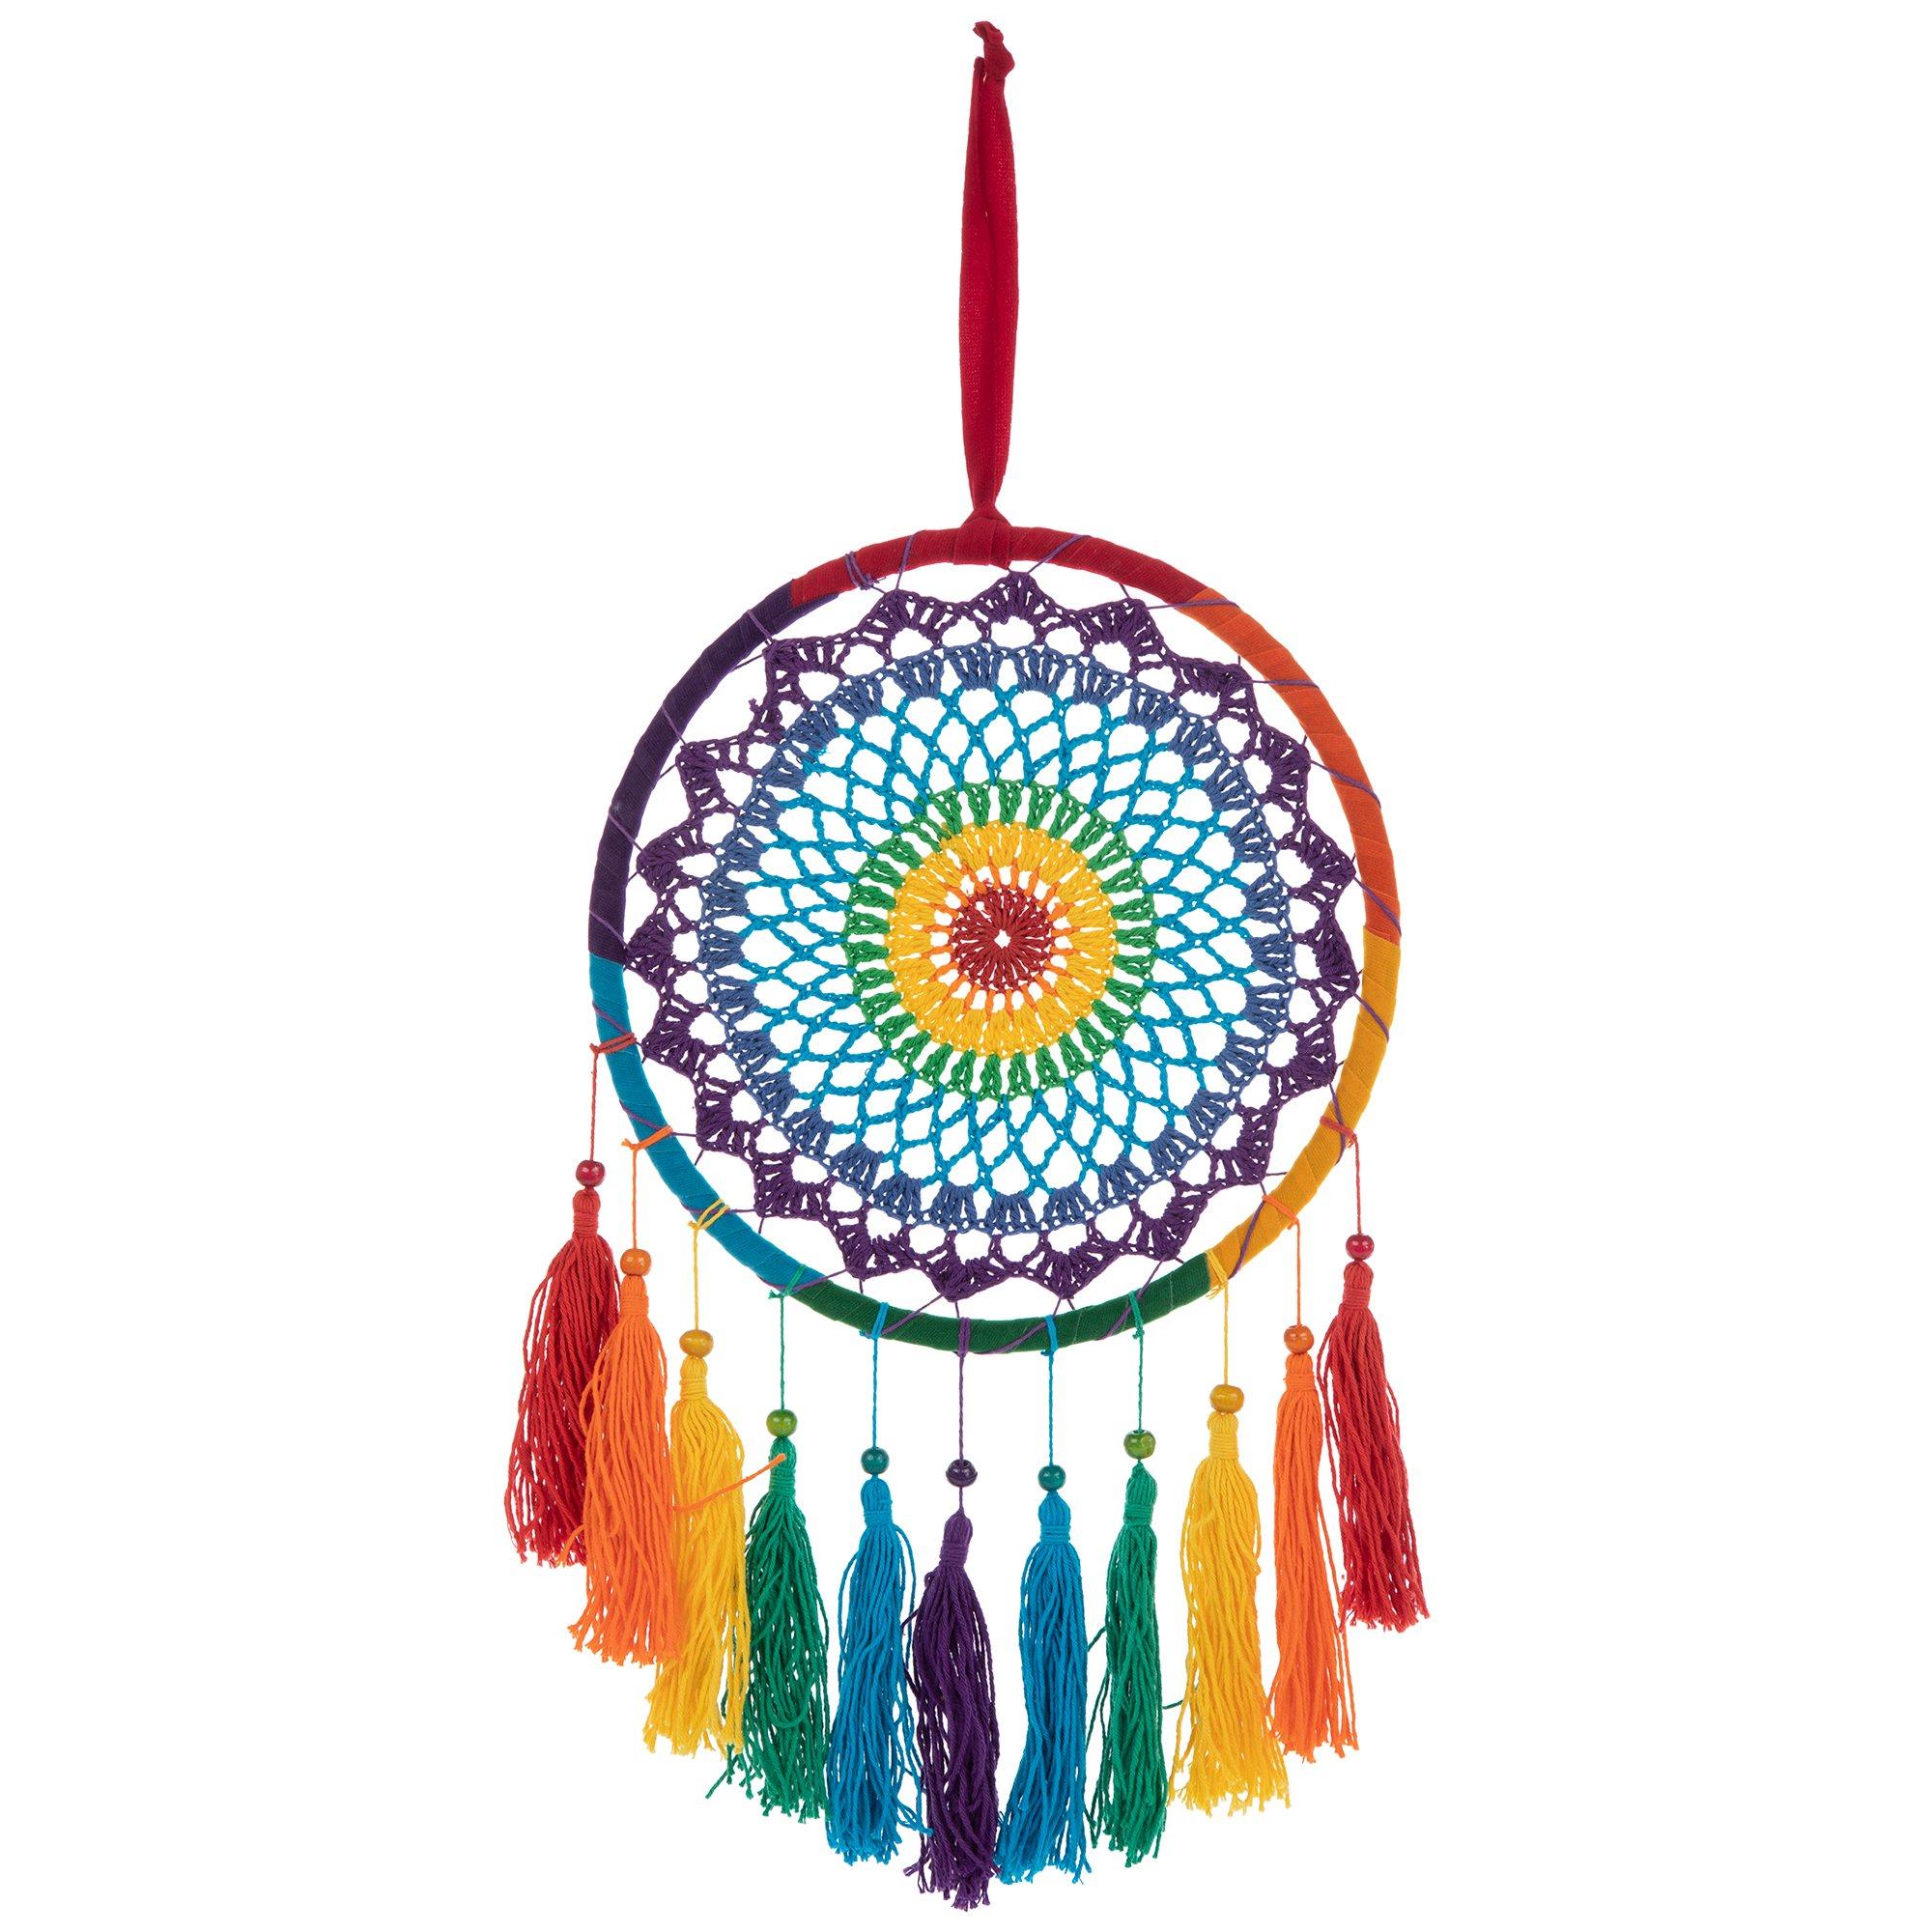 FREEBLOSS DIY Yarn Dream Catchers Kit Chakra Dream Catcher with Multi Color  Fringes Traditional Dreamcatcher Rainbow Colors Wall Hanging Decor